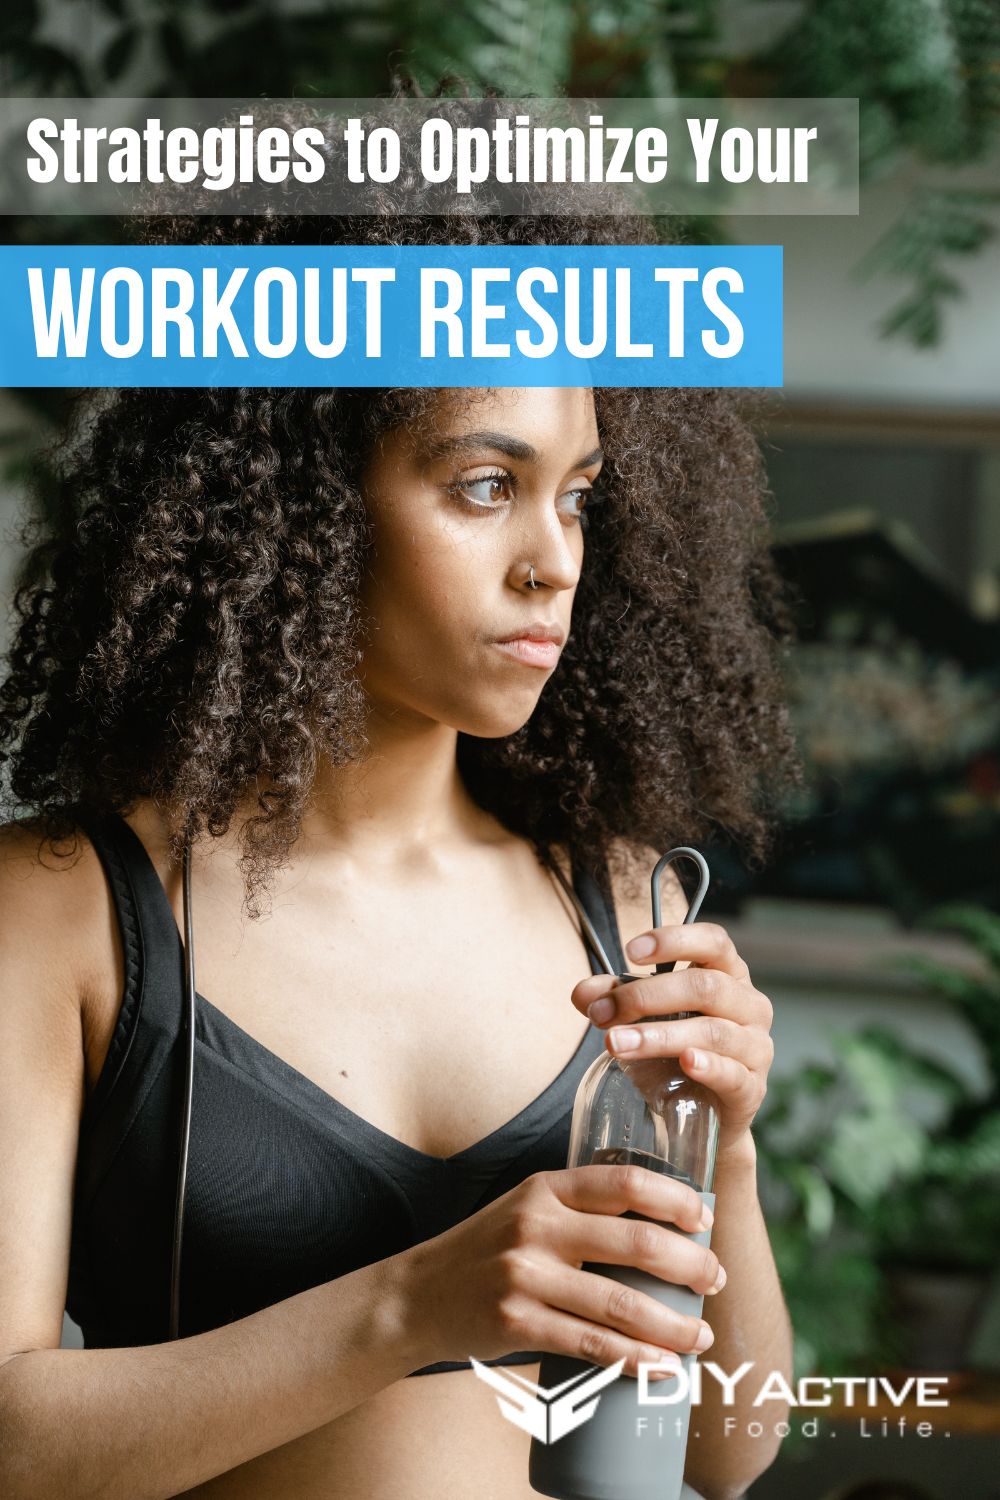 7 Nutritional Strategies to Optimize Your Workout Results